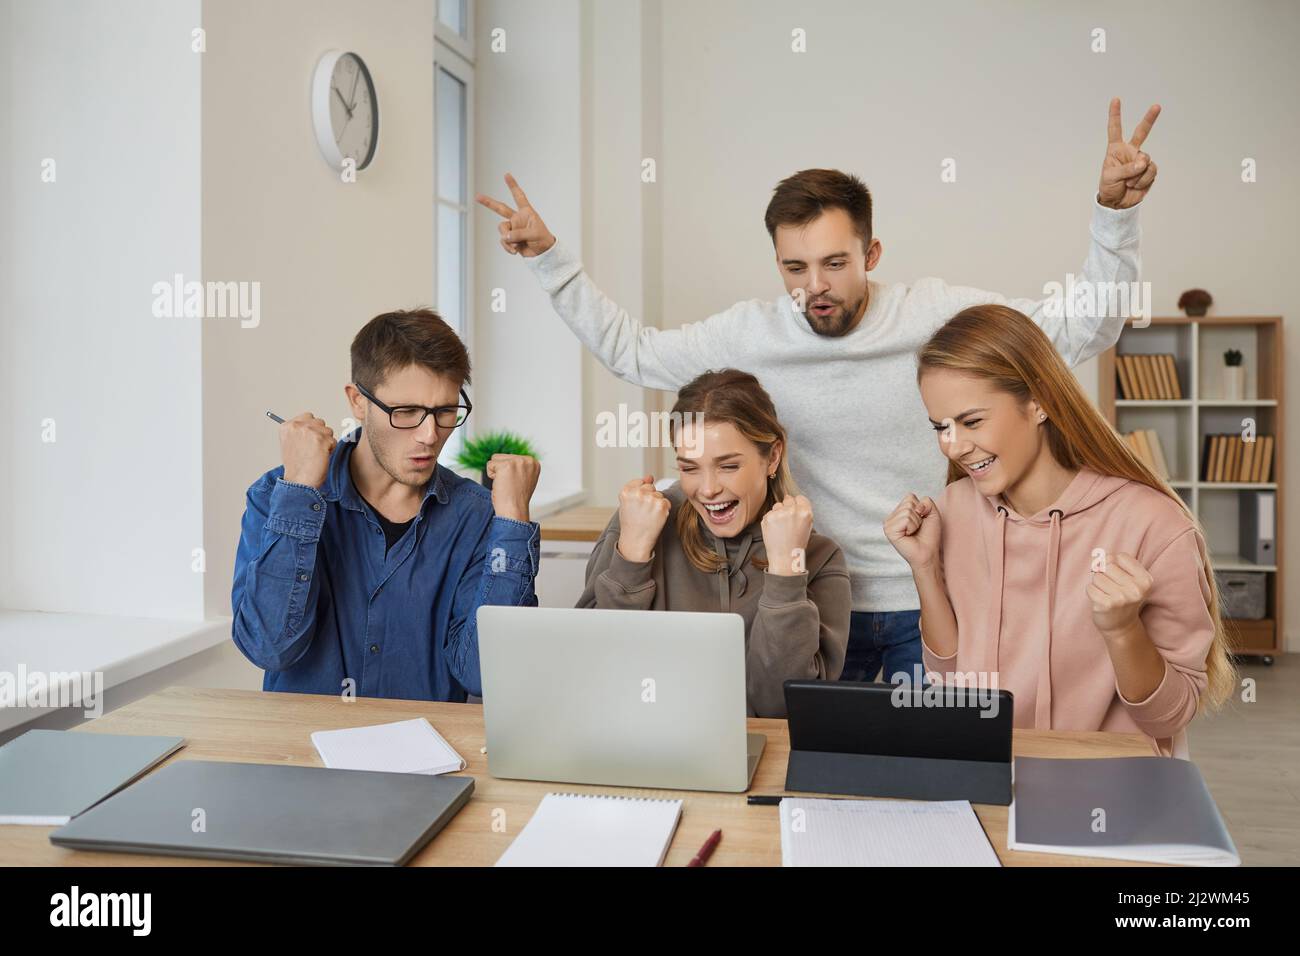 Smiling diverse young people triumph with news on computer Stock Photo